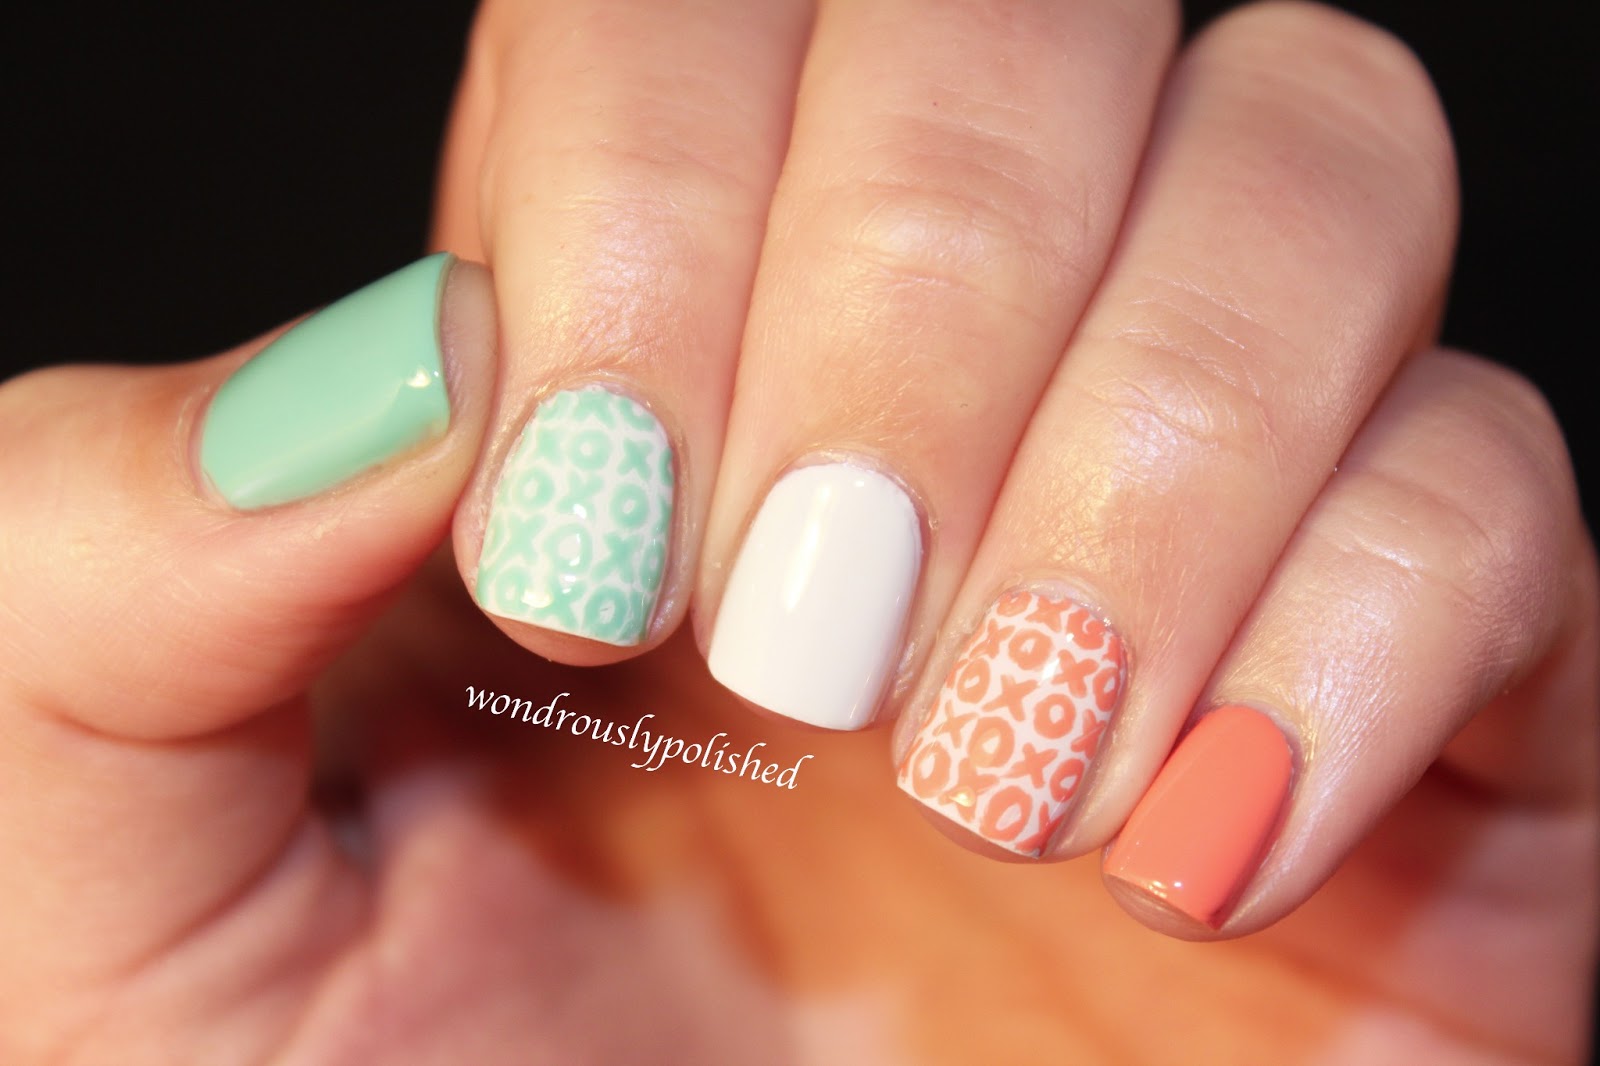 8. "February Nail Art: Designs and Techniques to Try" - wide 5